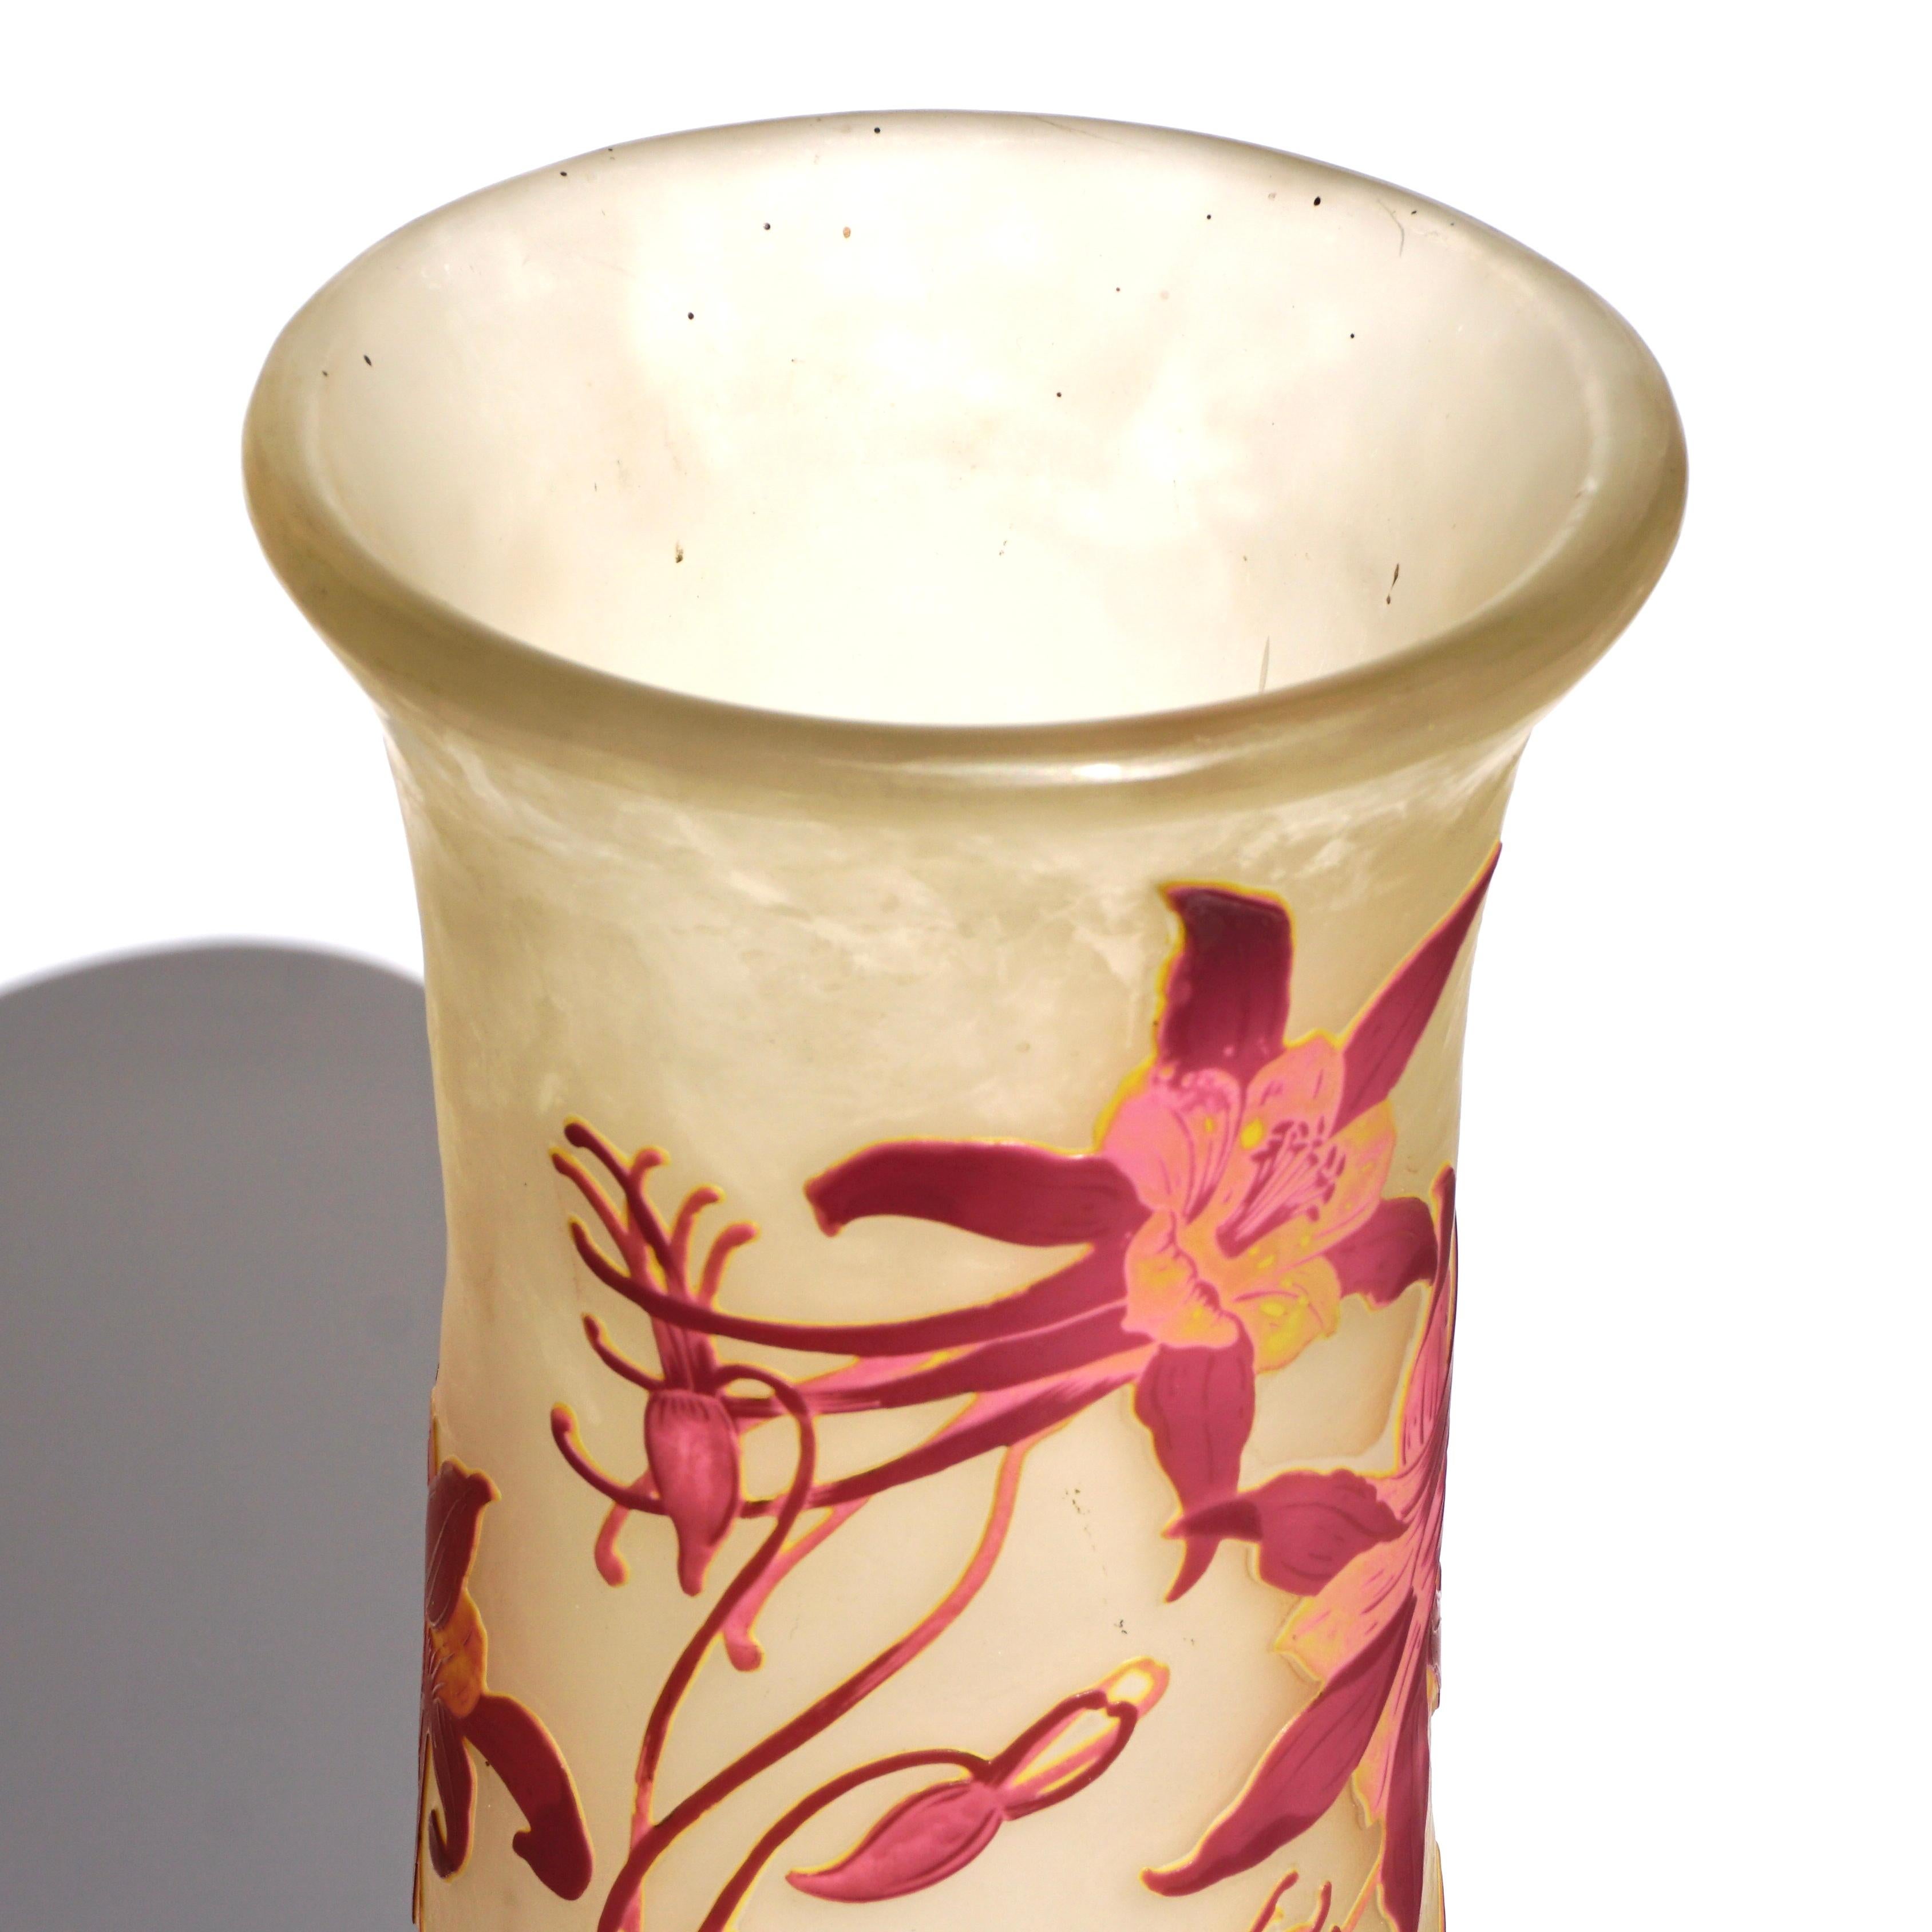 Monumental 24’ Emile Galle Four Color Cameo Vase In Excellent Condition For Sale In Dallas, TX